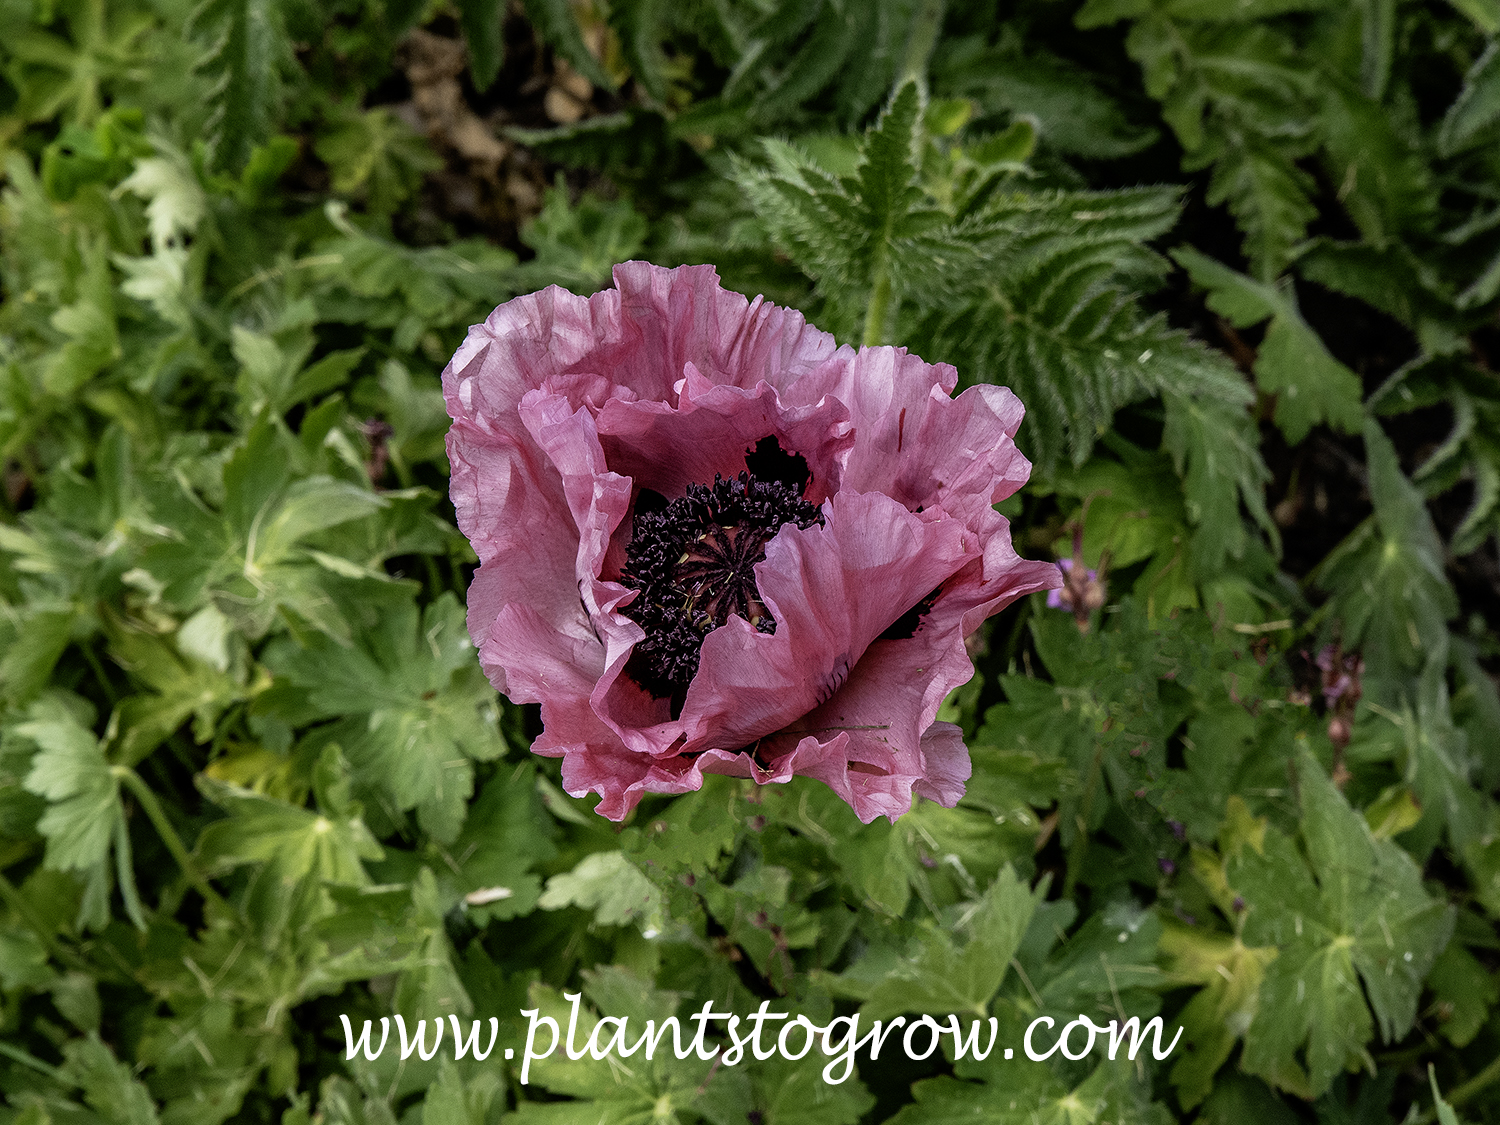 'Patty's Plum' Oriental Poppy (Papaver orientalis)
The next seven pictures are of the same plant over a two year period.